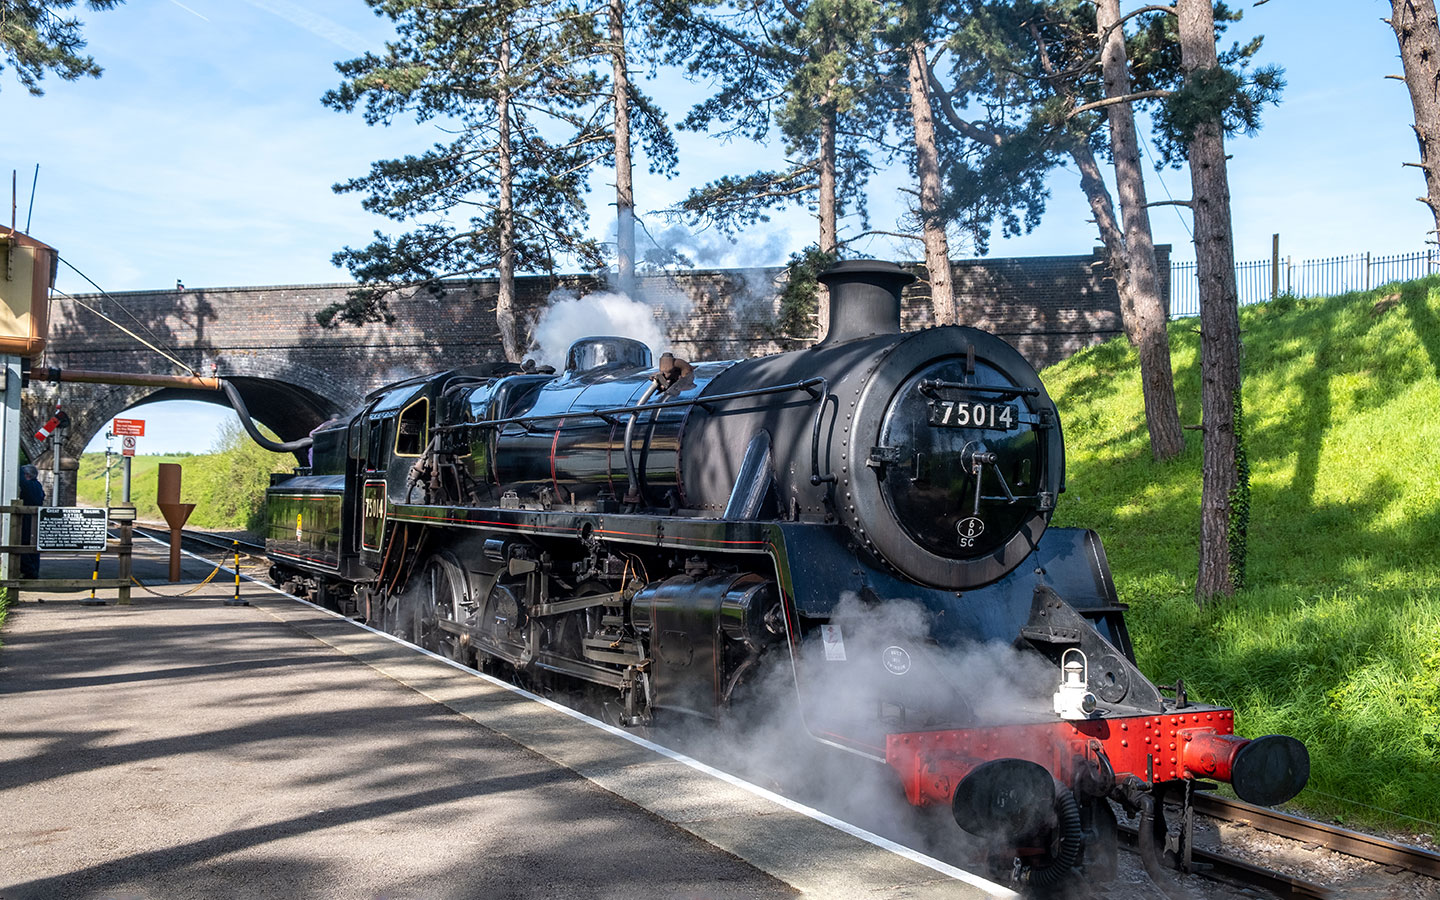 A guide to the Gloucestershire-Warwickshire Steam Railway: The Cotswold steam train